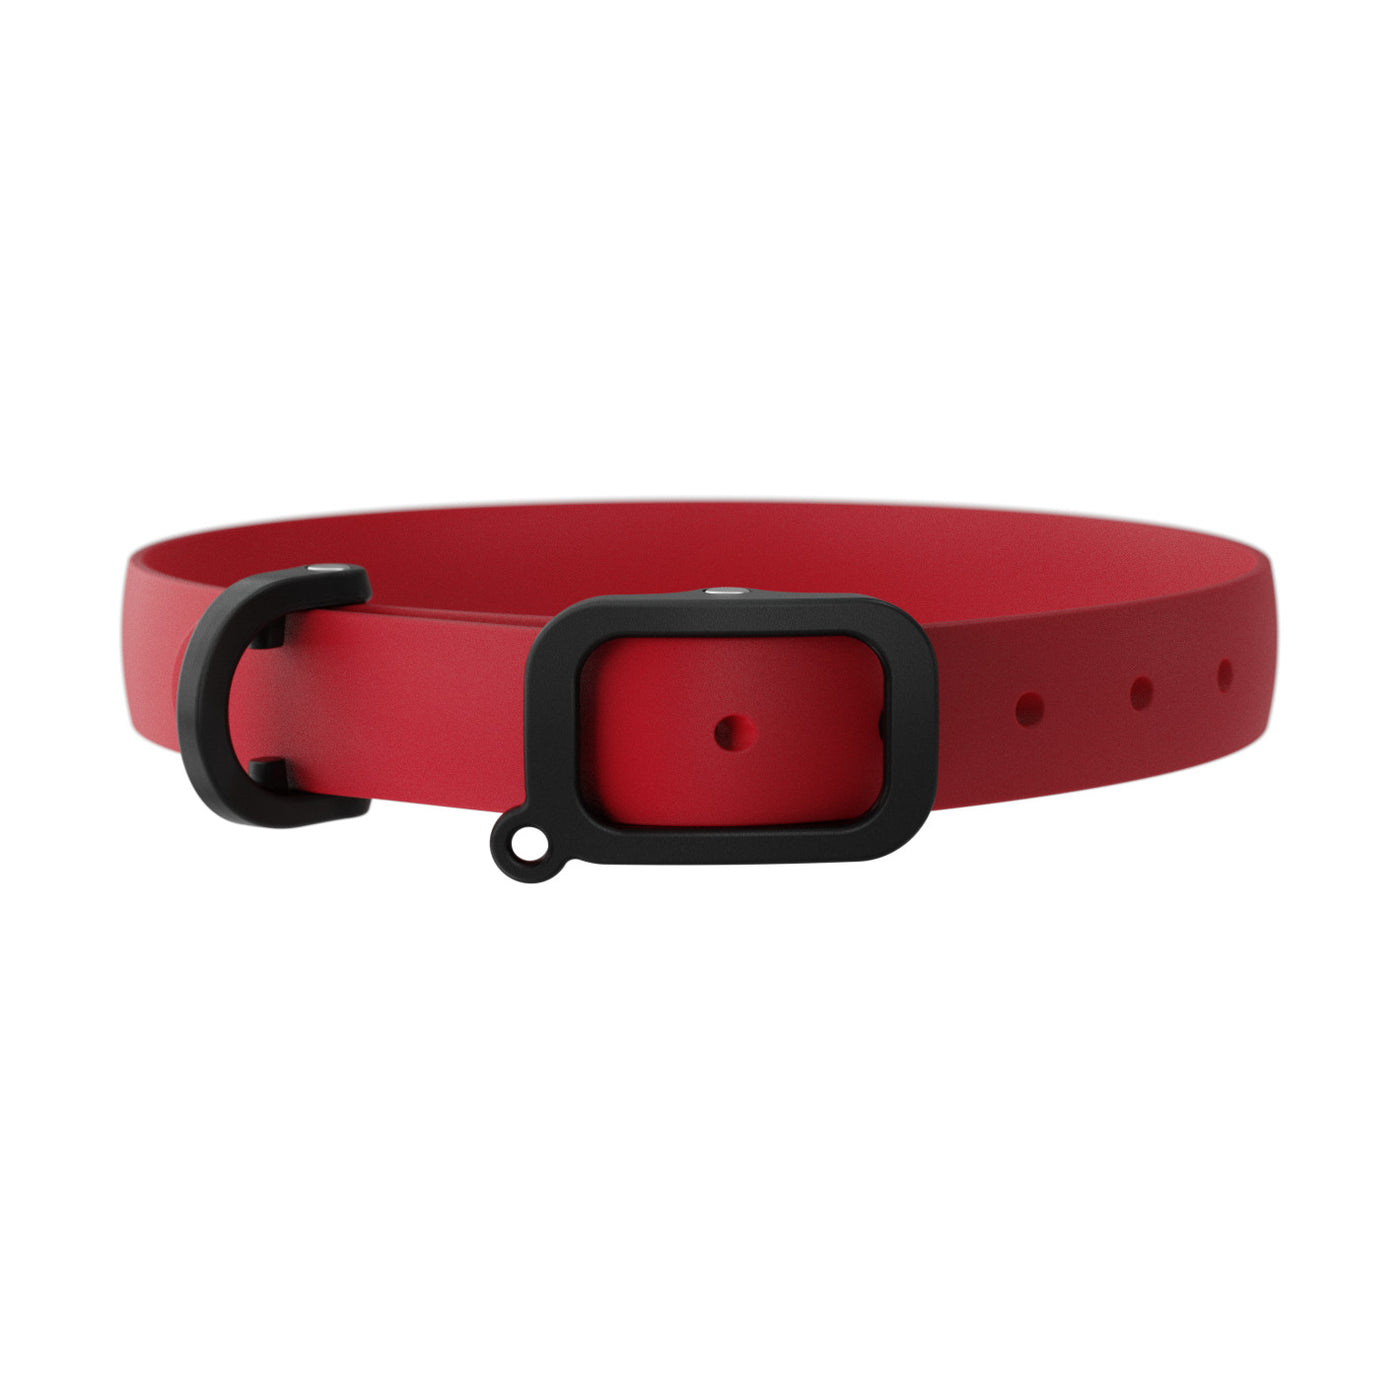 NUVUQ - Waterproof and Lightweight Dog Collar - Tomato Red